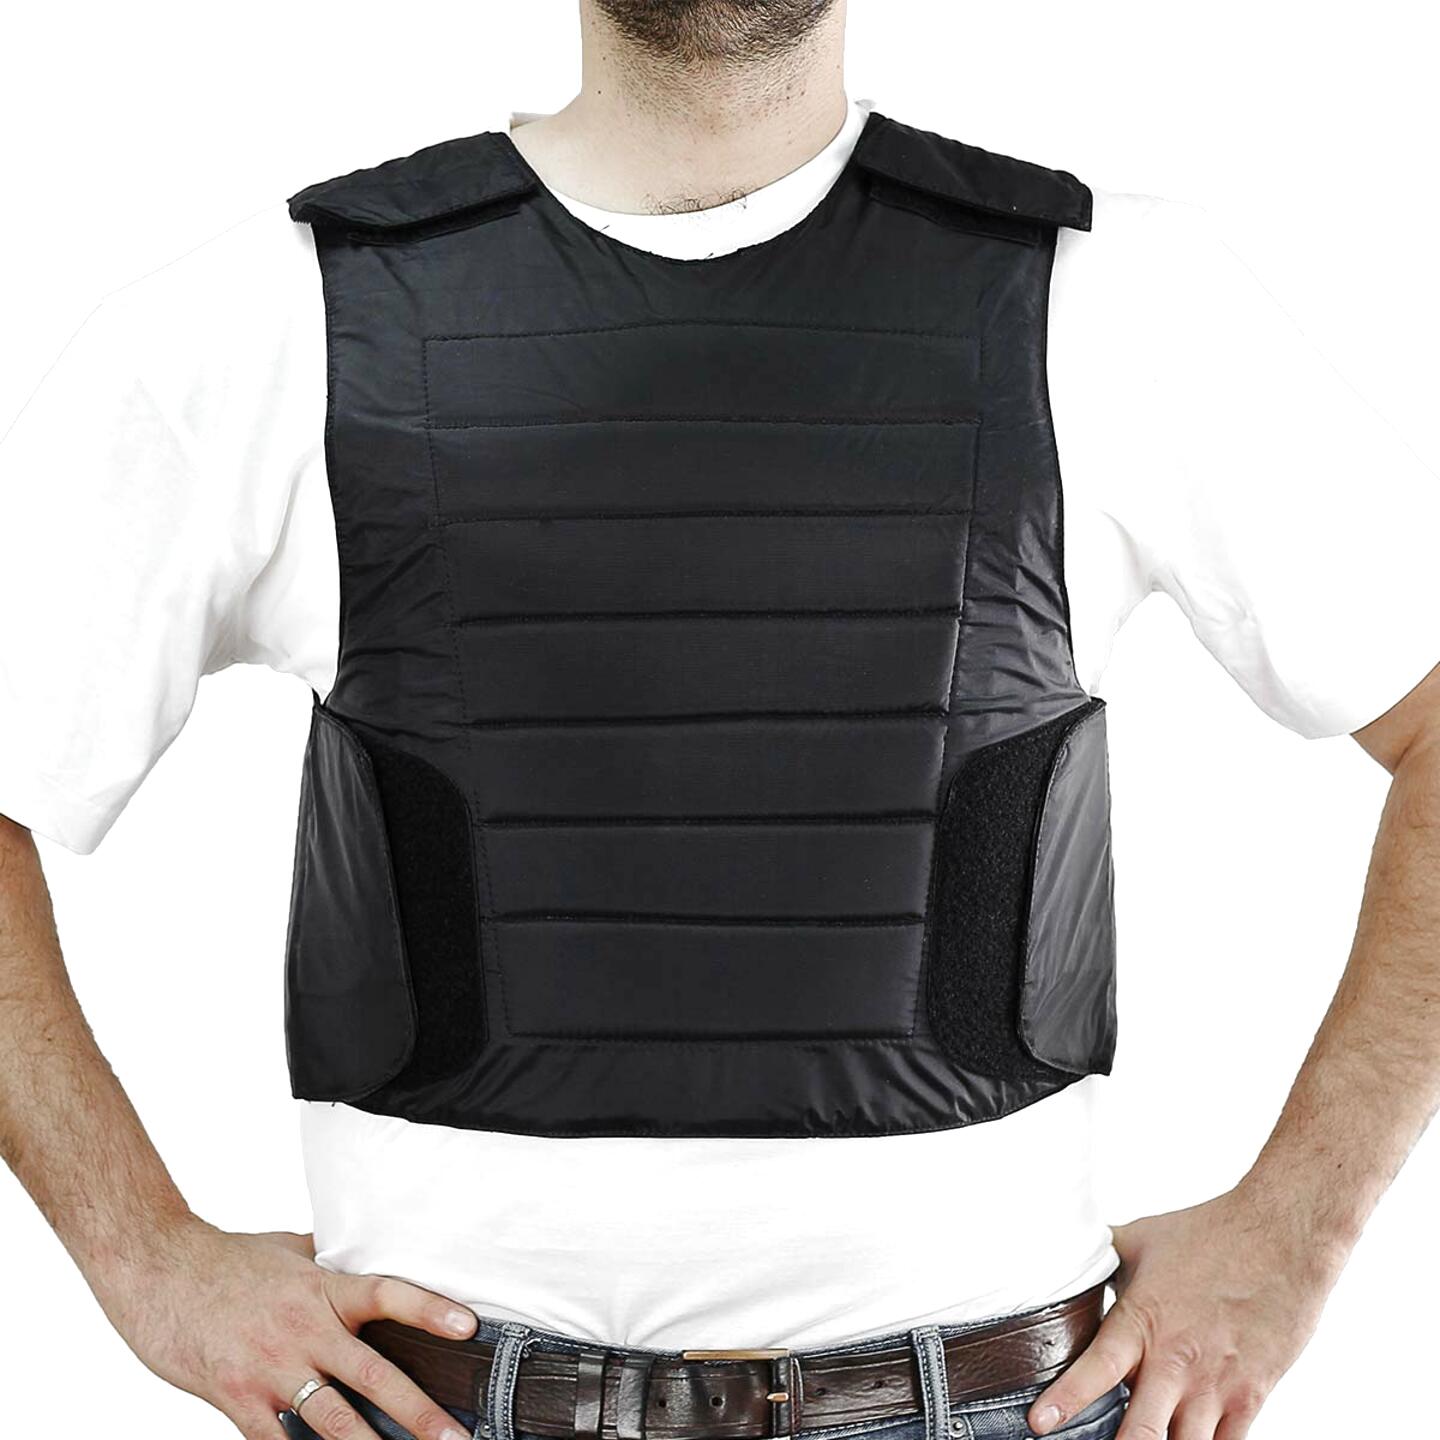 Body Armor Bullet Proof Vest for sale in UK | View 63 ads